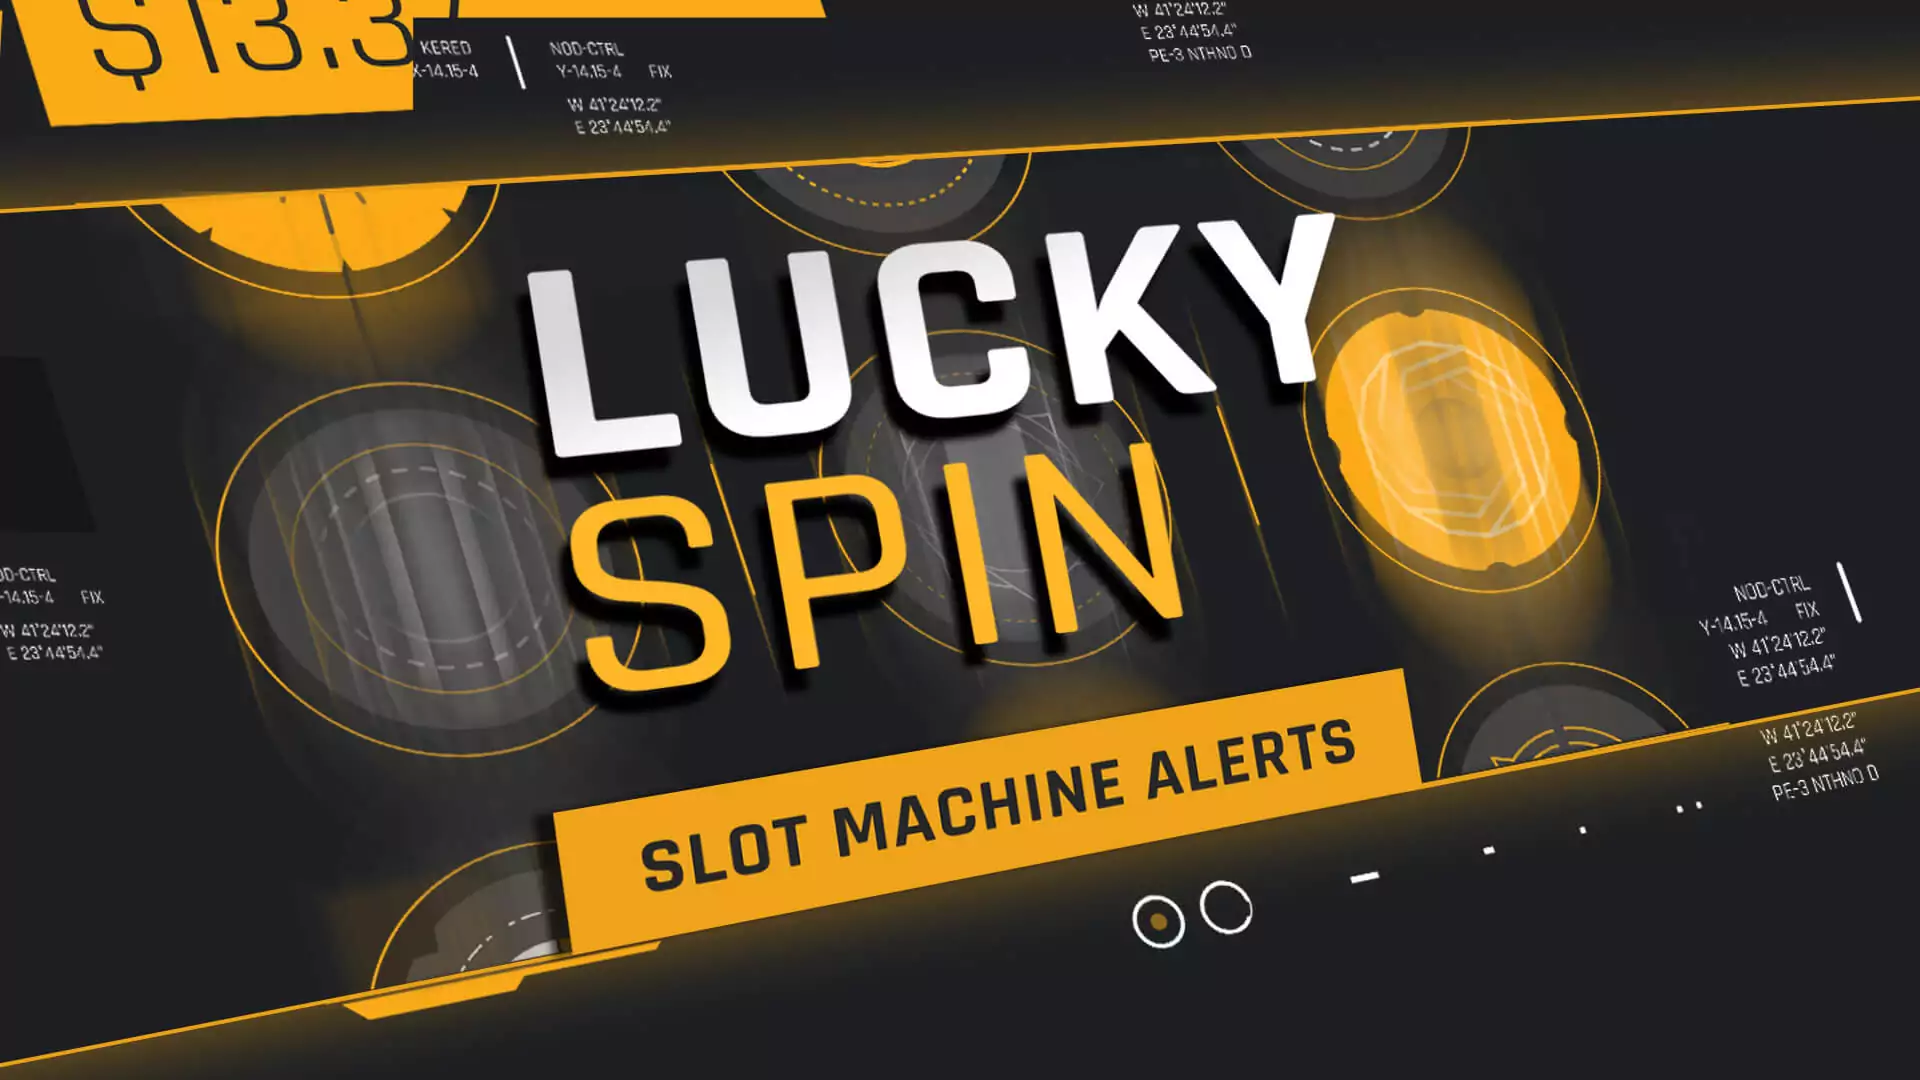 Lucky Spin Slot Machine Alerts